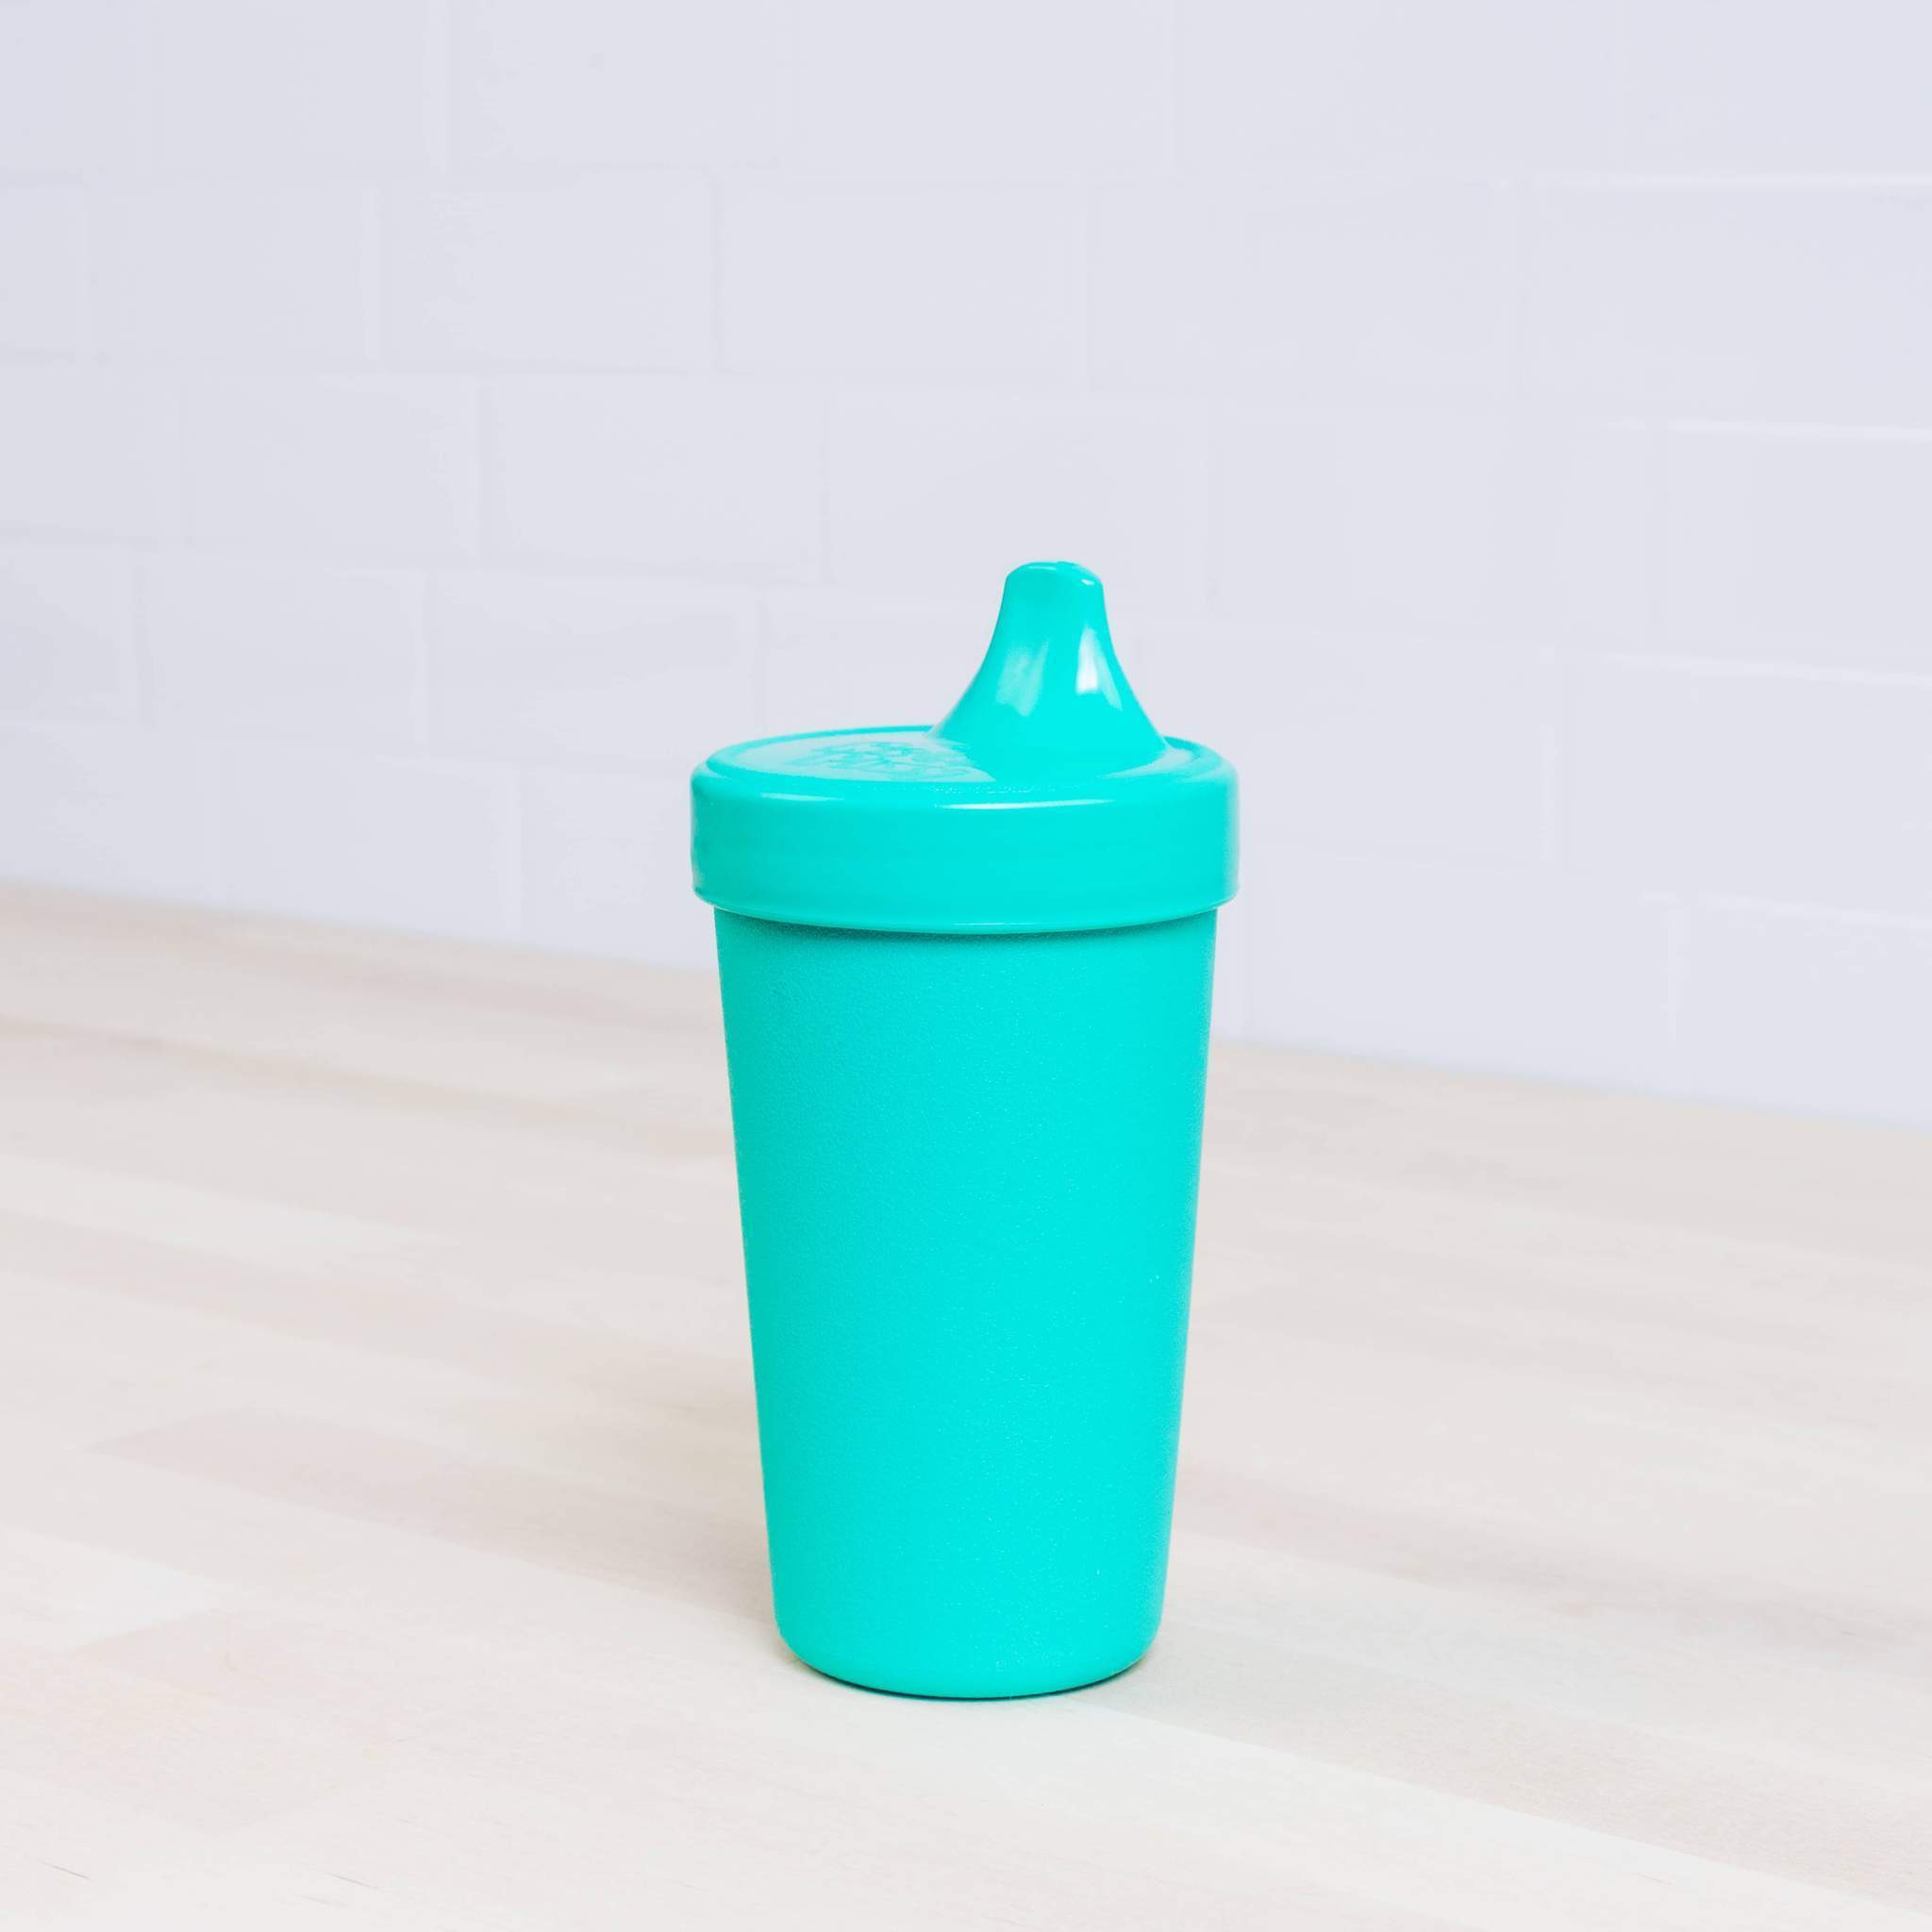 Non-spill Sippy Cup (2 pack) - Pink & Aqua